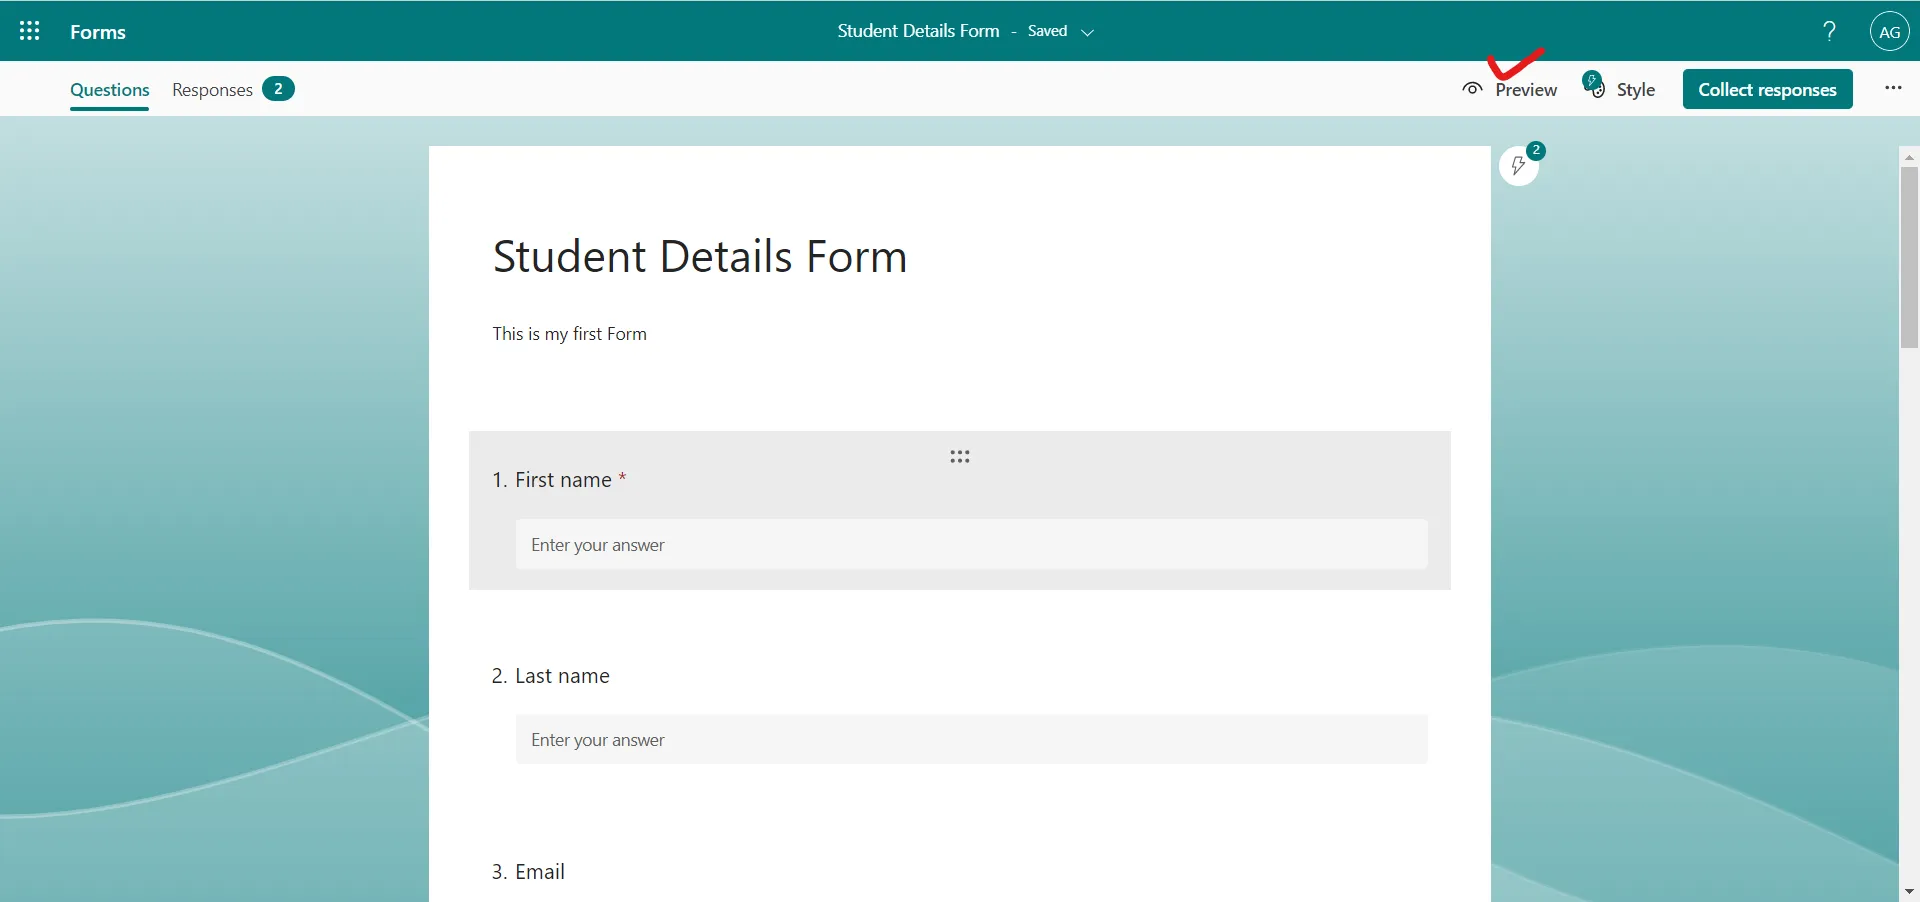 Preview Microsoft Form